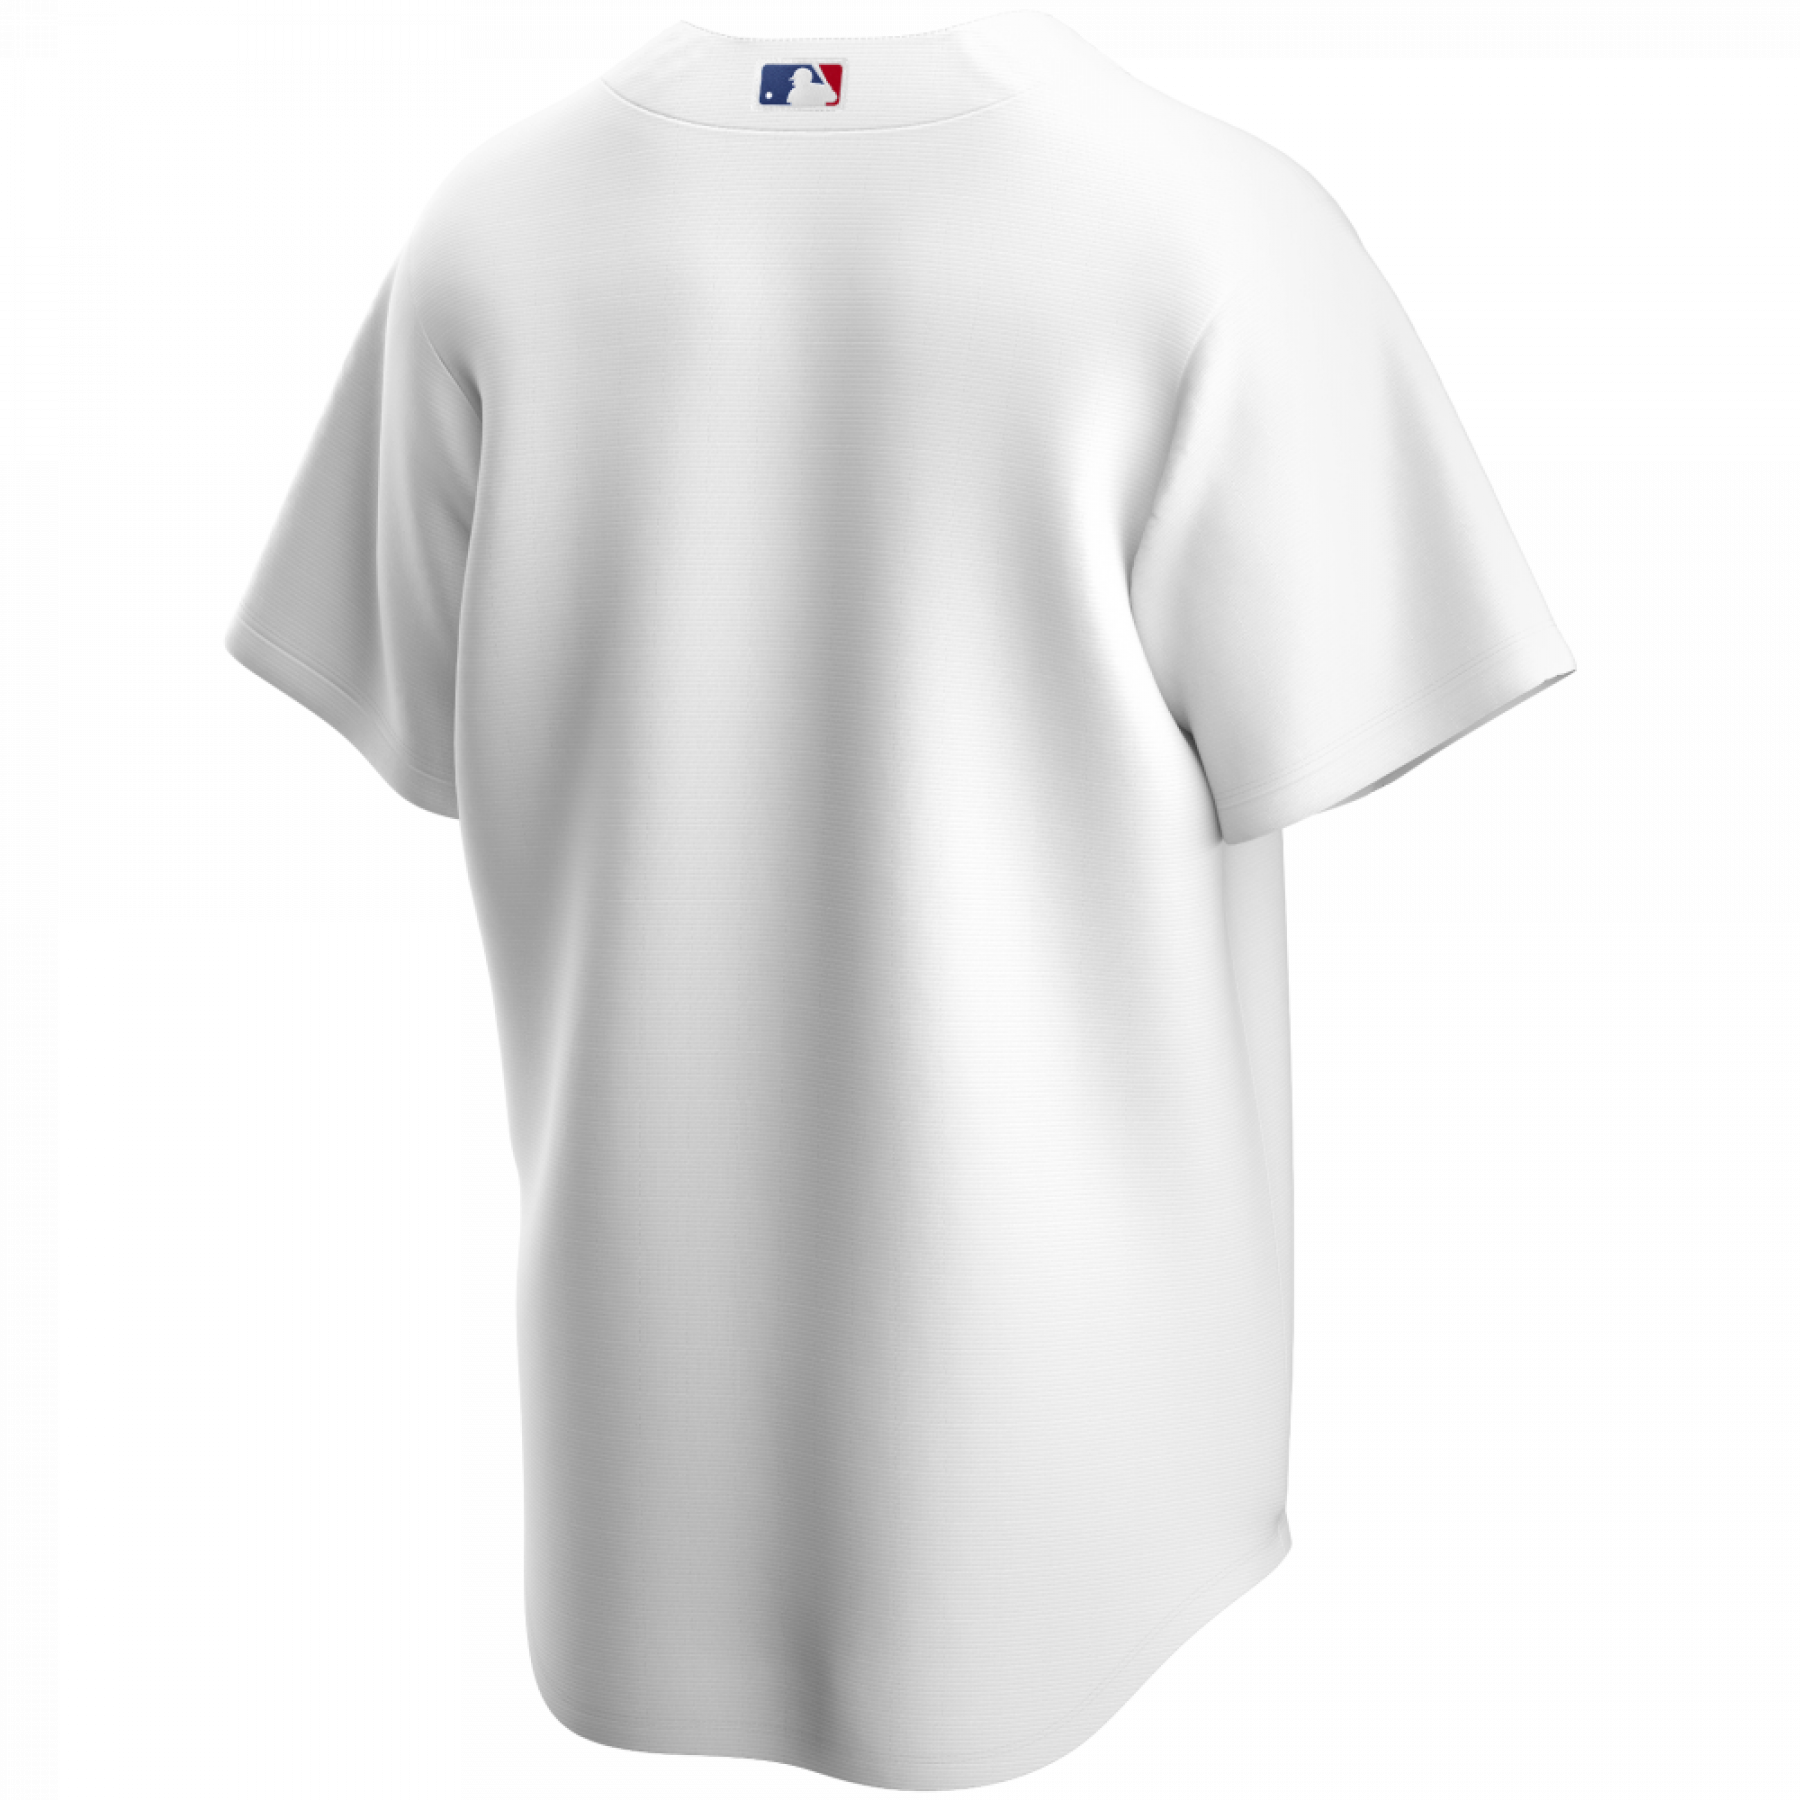 Official replica jersey Los Angeles Dodgers